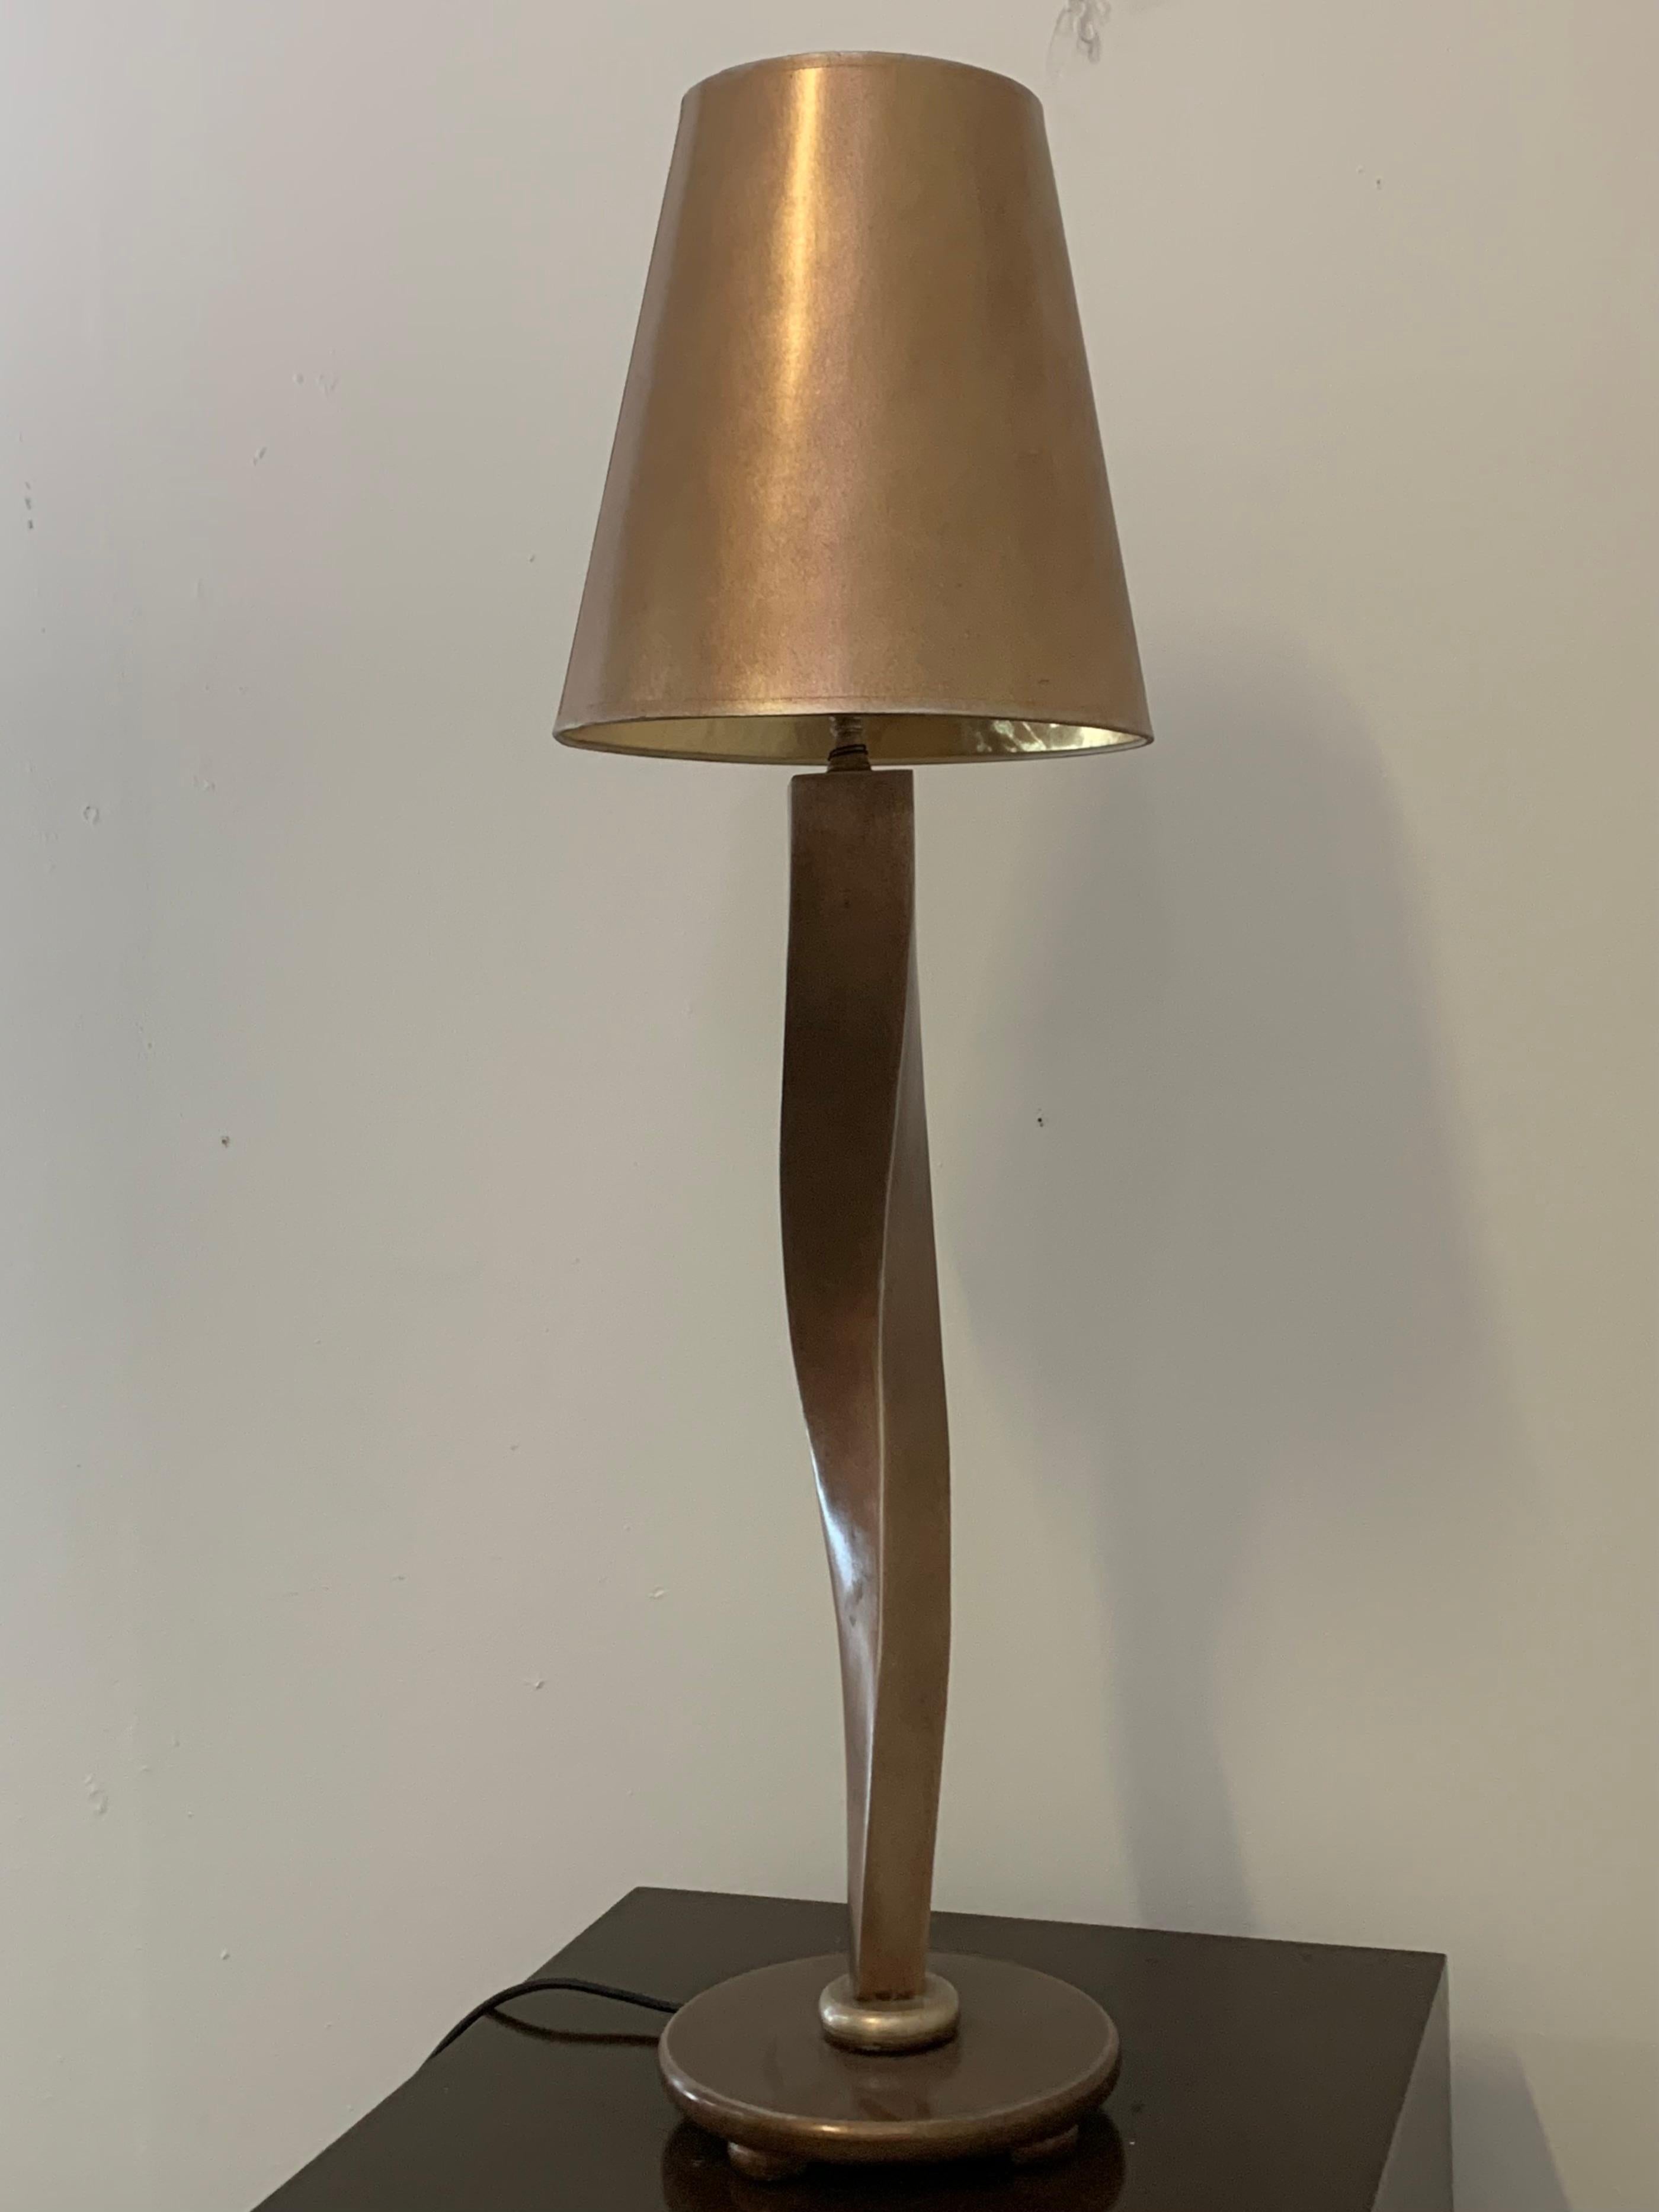 Futurist Sinuous Console Table Lamp from Lam Lee Group, 1990s For Sale